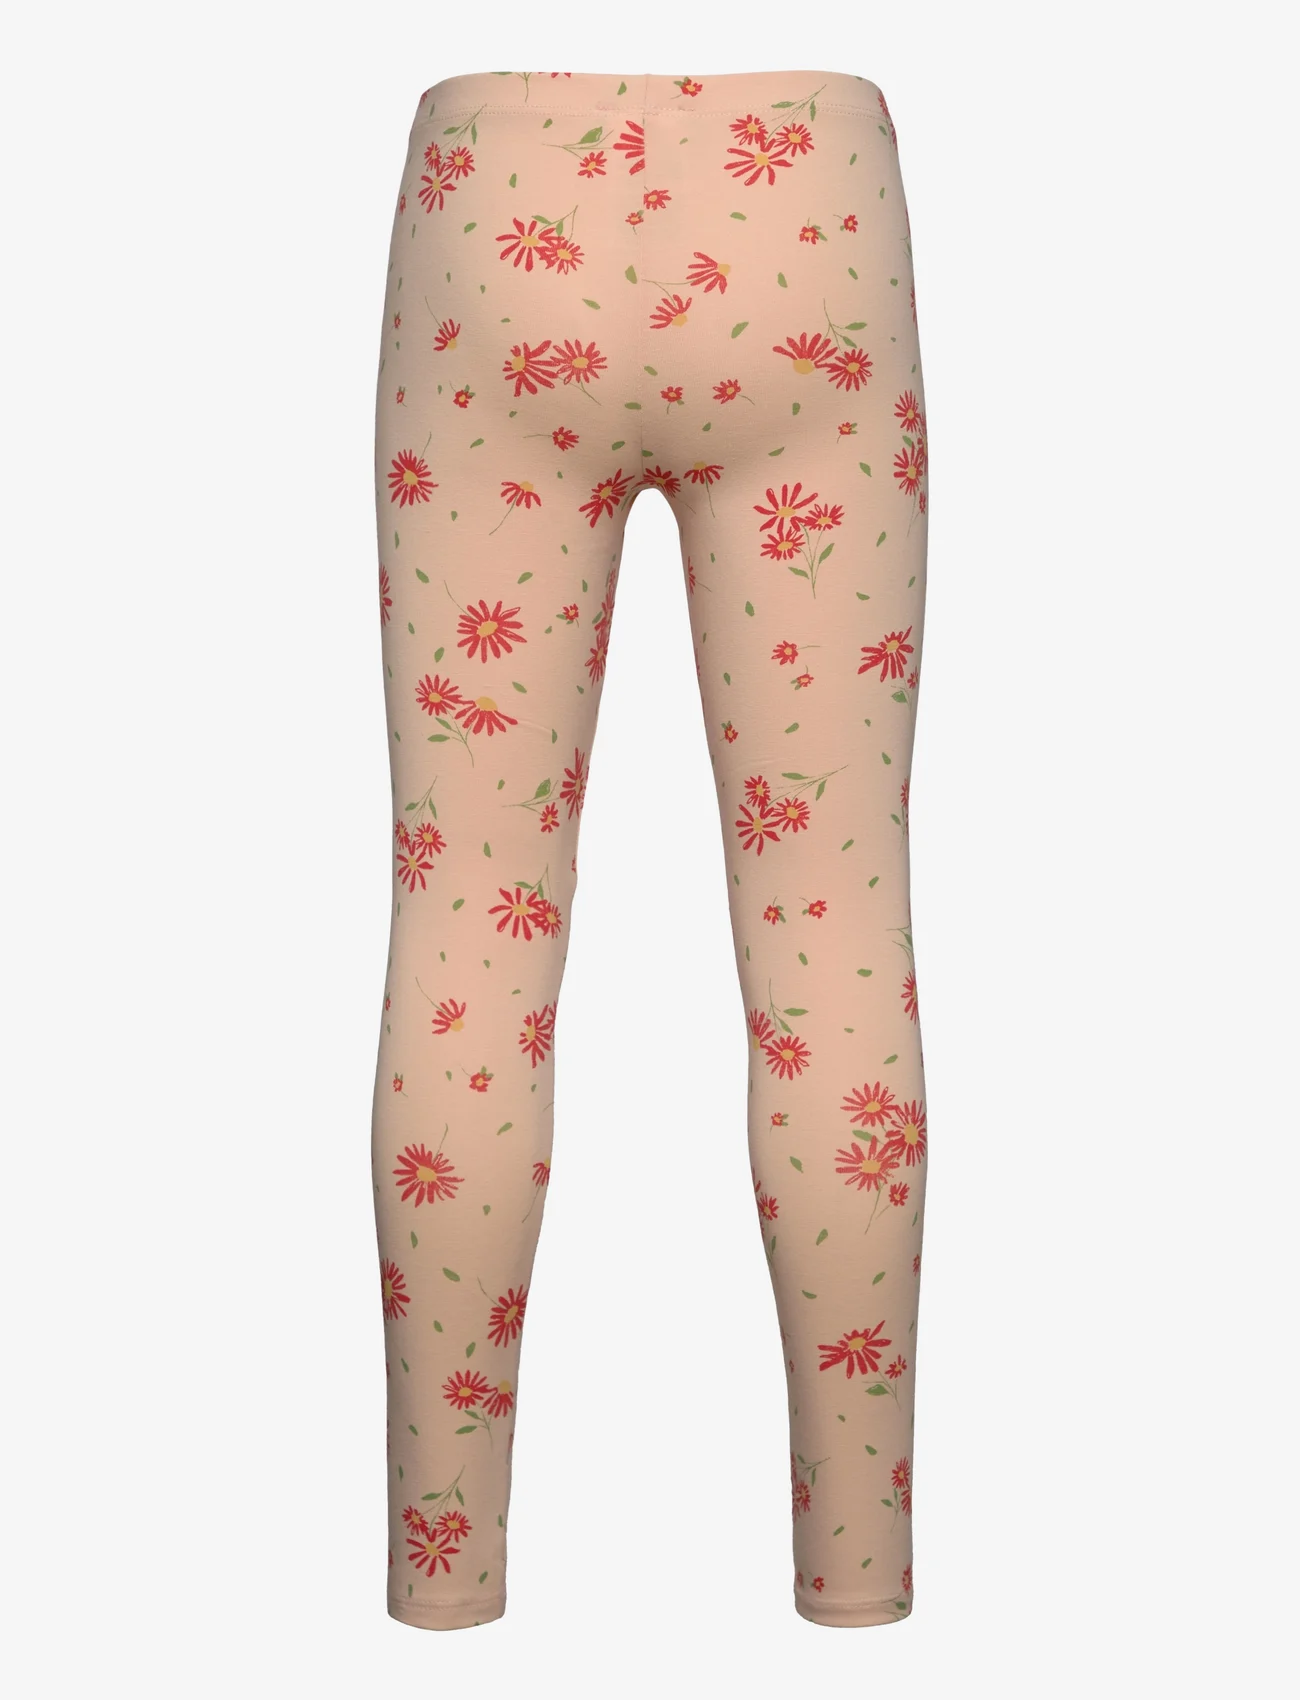 United Colors of Benetton - LEGGINGS - lowest prices - red flowers print - 1